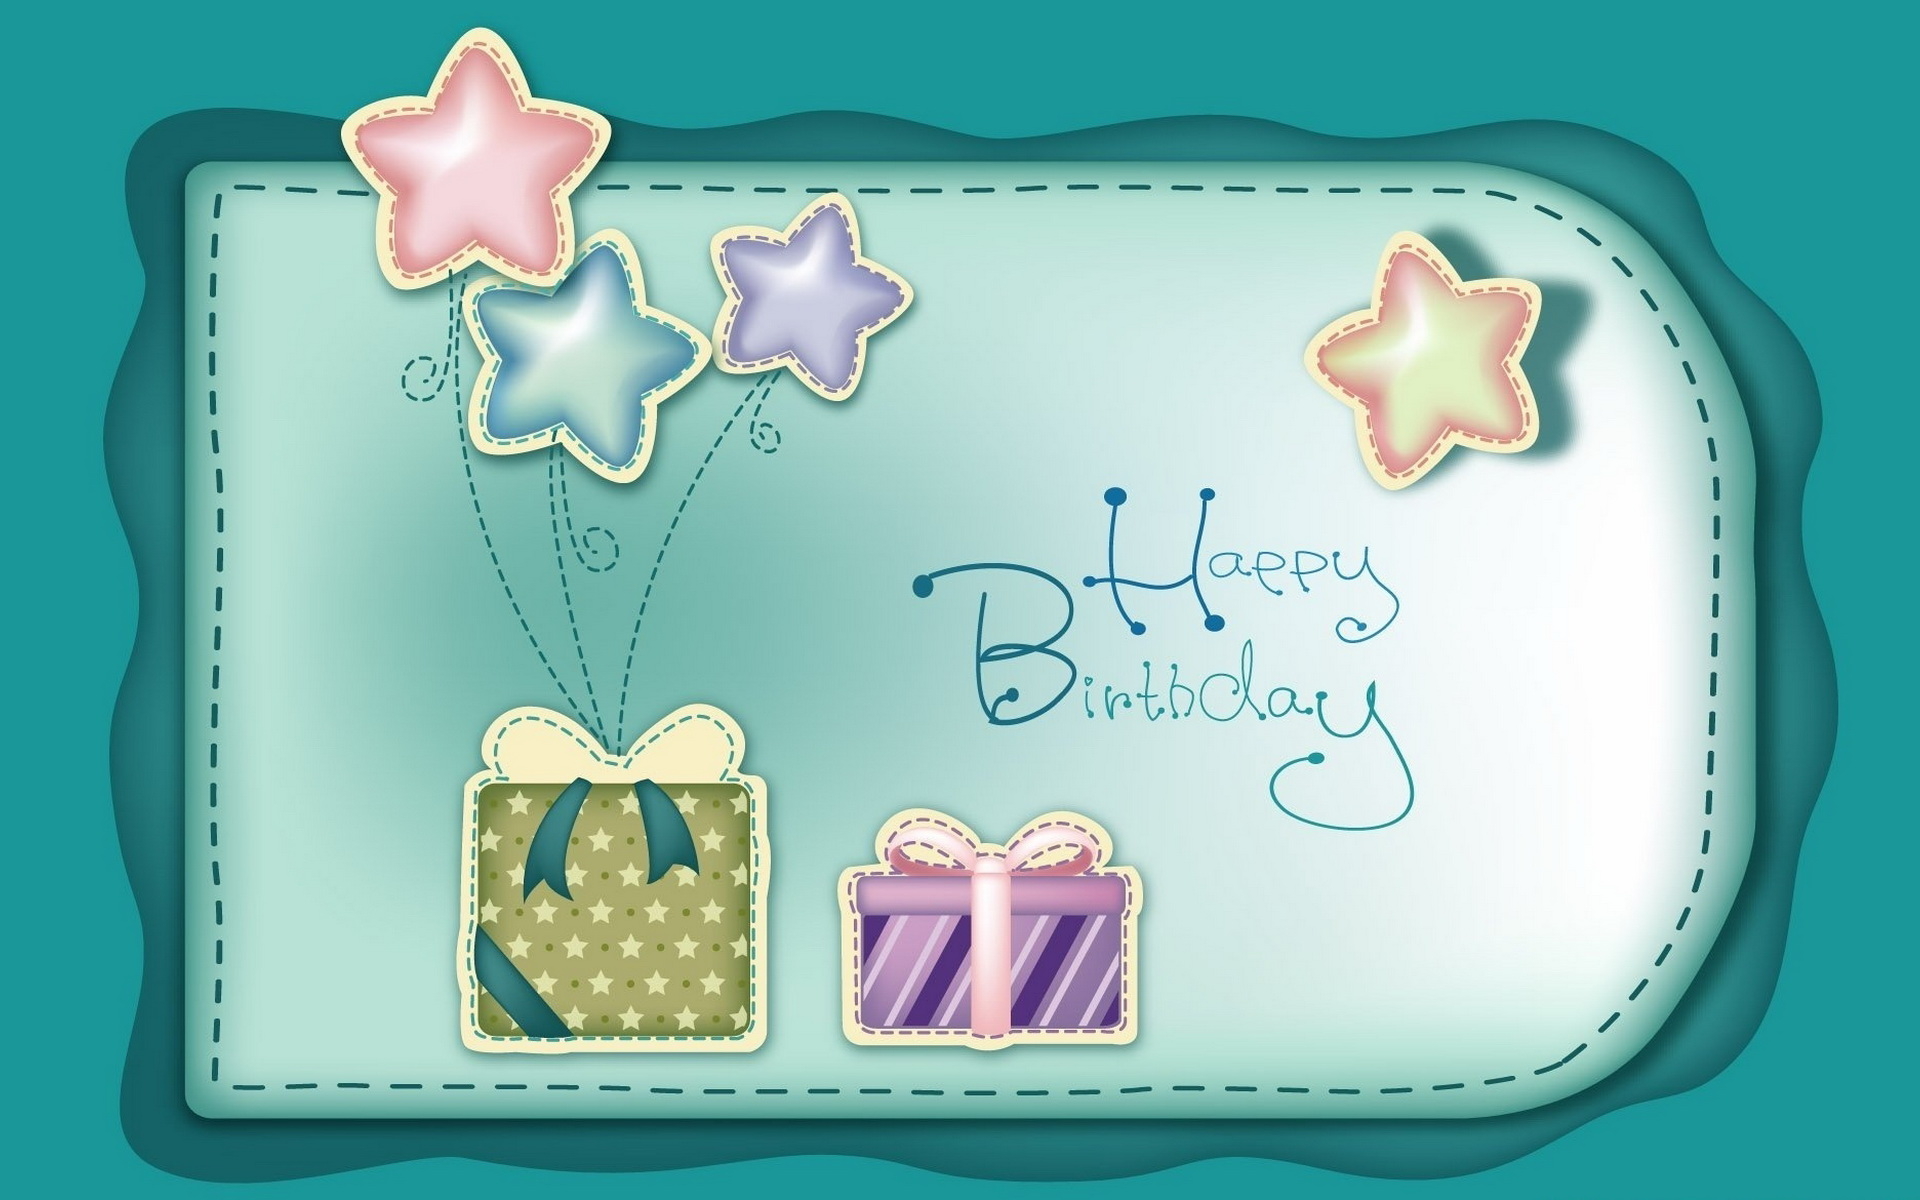 BirtHDay Card Wallpaper And Image Pictures Photos